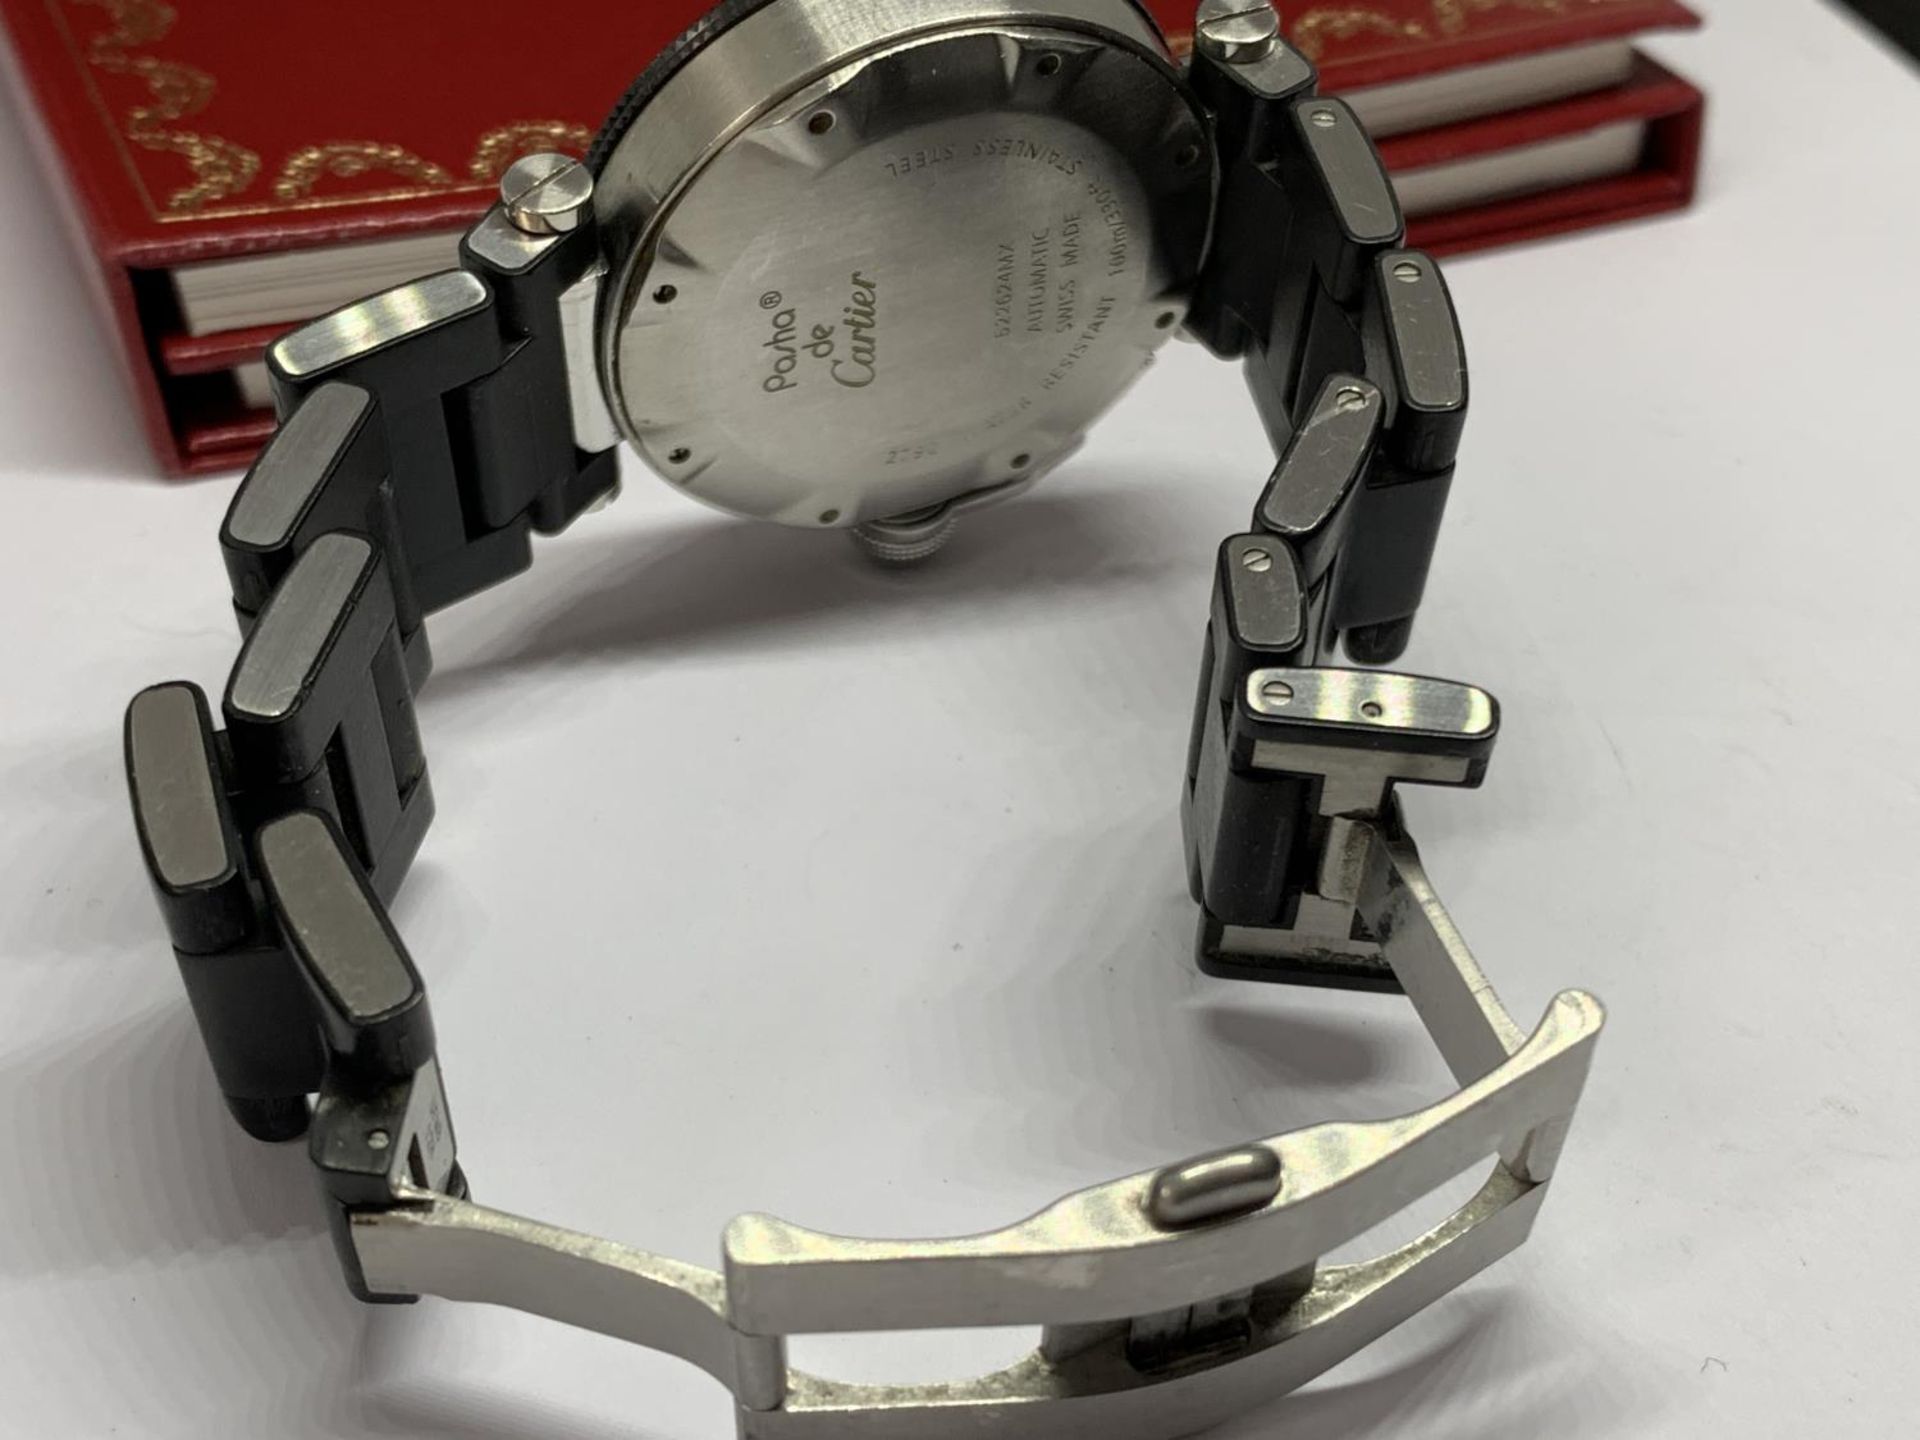 A CARTIER SEATIMER AUTOMATIC WATCH REF 2790 - Image 3 of 5